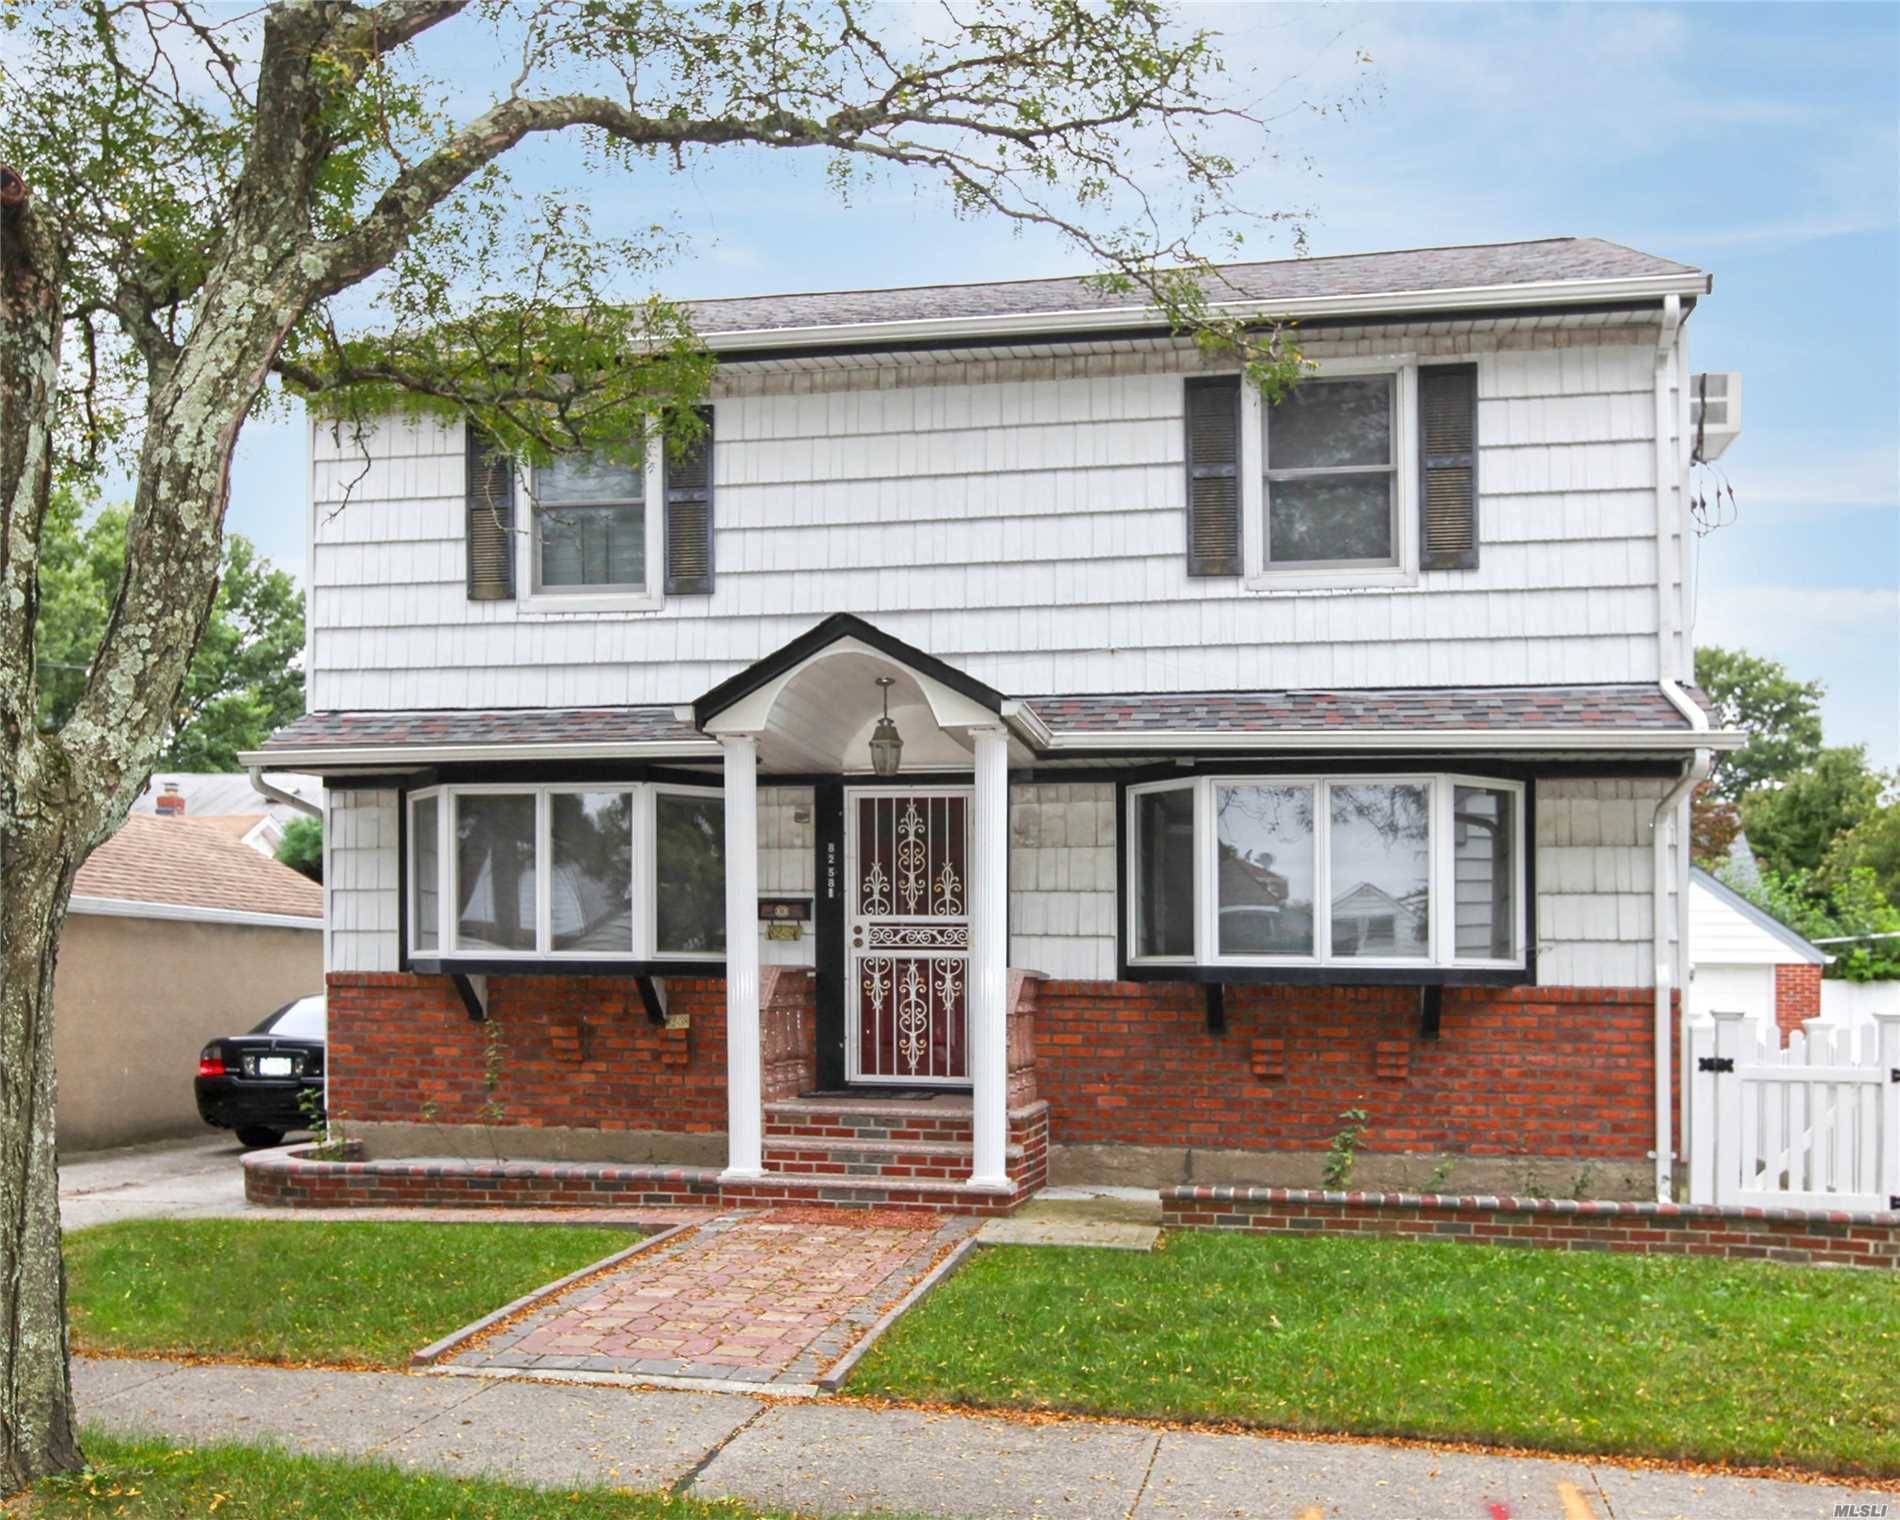 Nice Sized Colonial Home In The Floral Park/Glen Oaks Area.